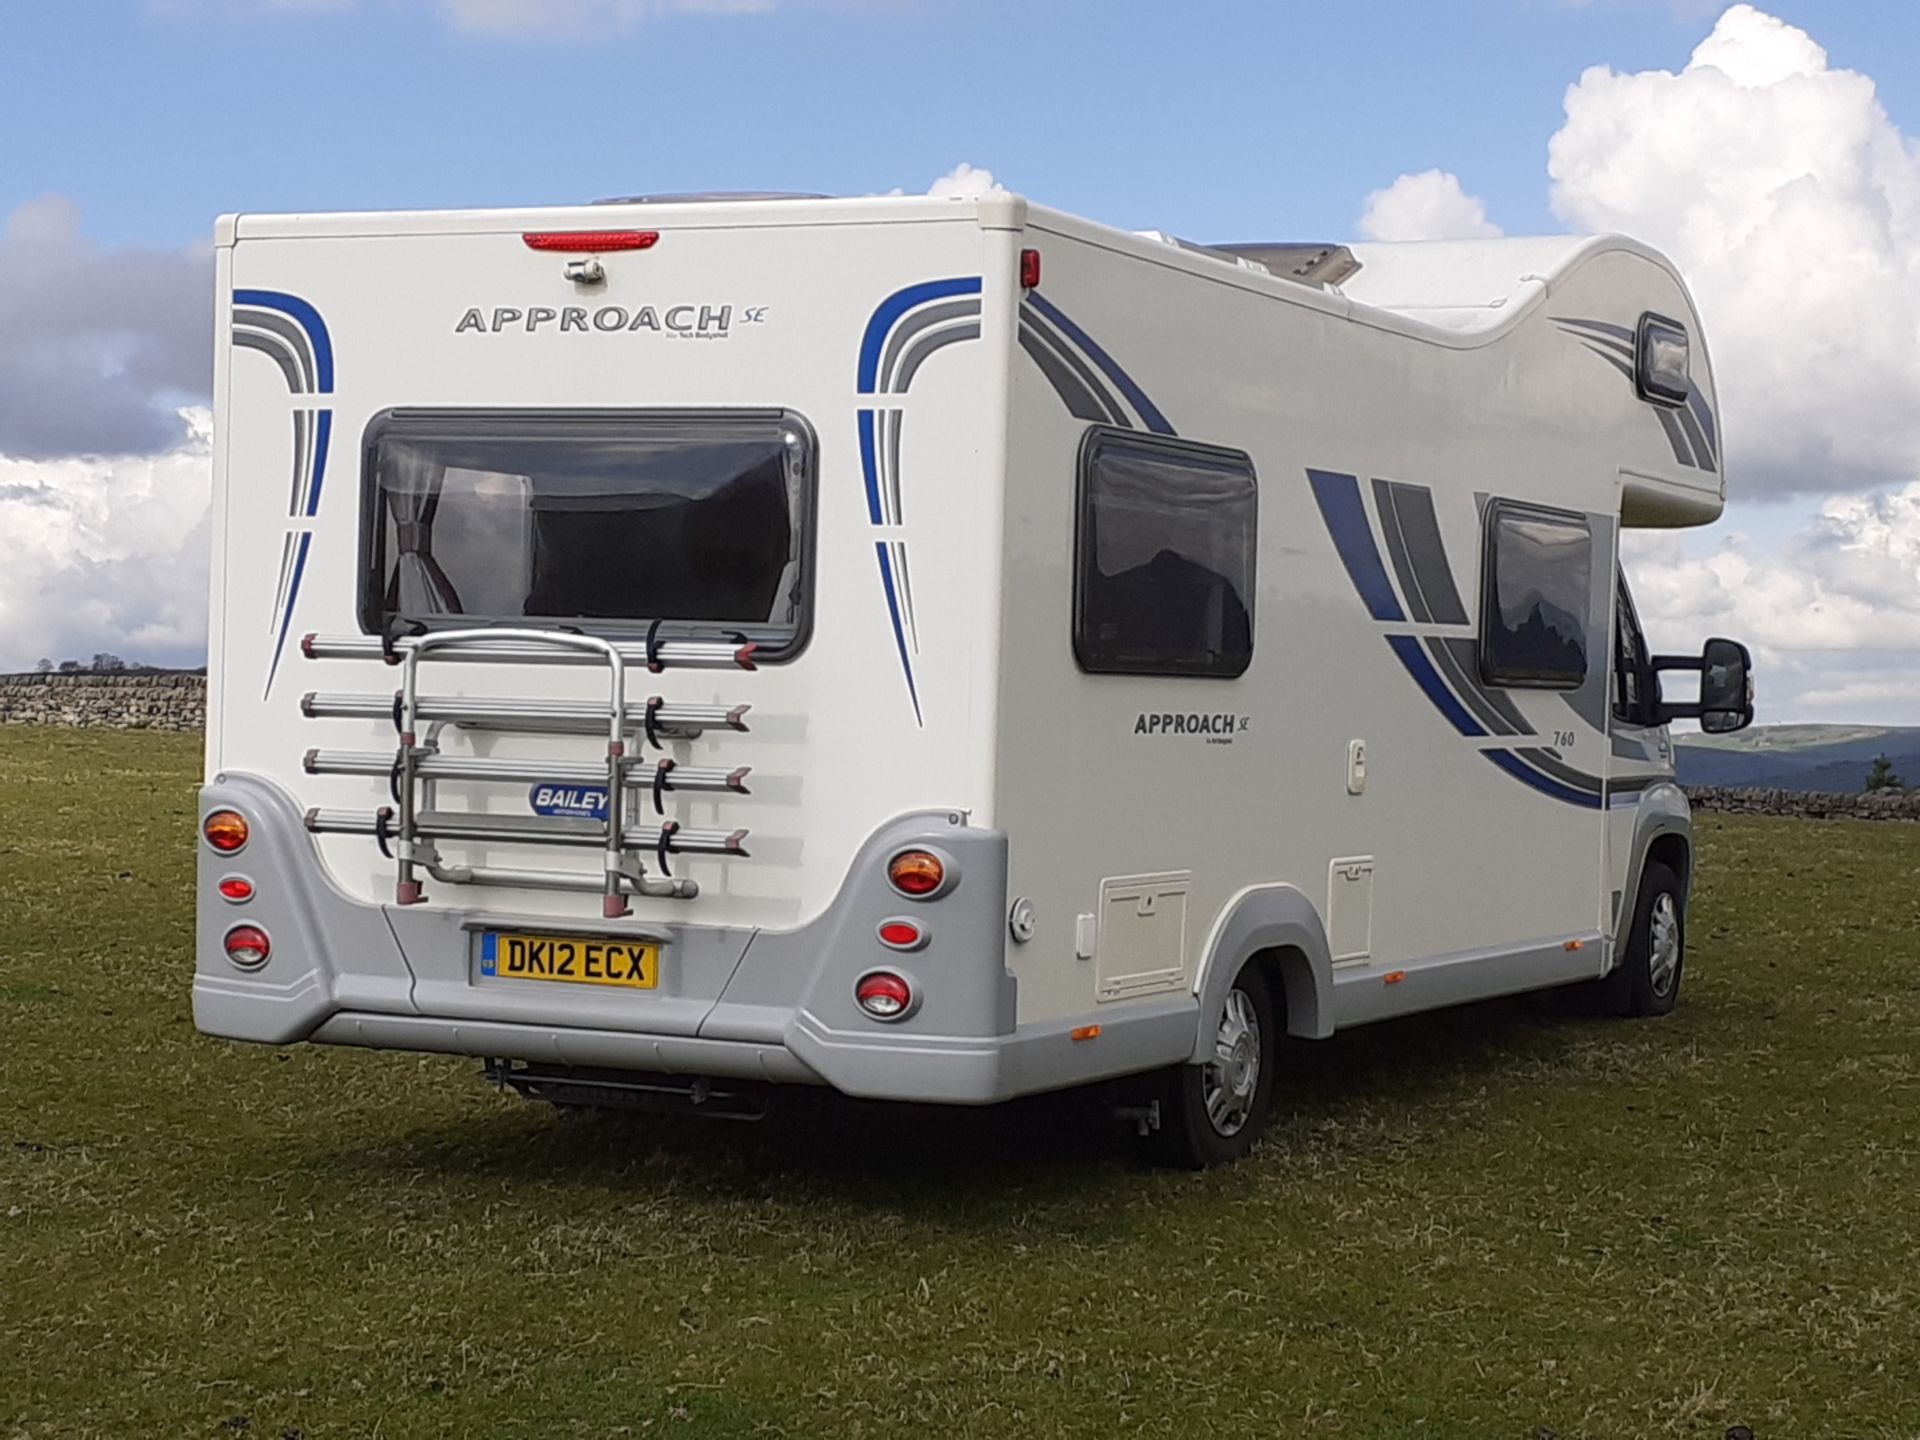 2012 BAILEY APPROACH 760 SE LUXURY 6 BERTH MOTORHOME £10K OF EXTRAS, 30,000 MILES FROM NEW - Image 11 of 31